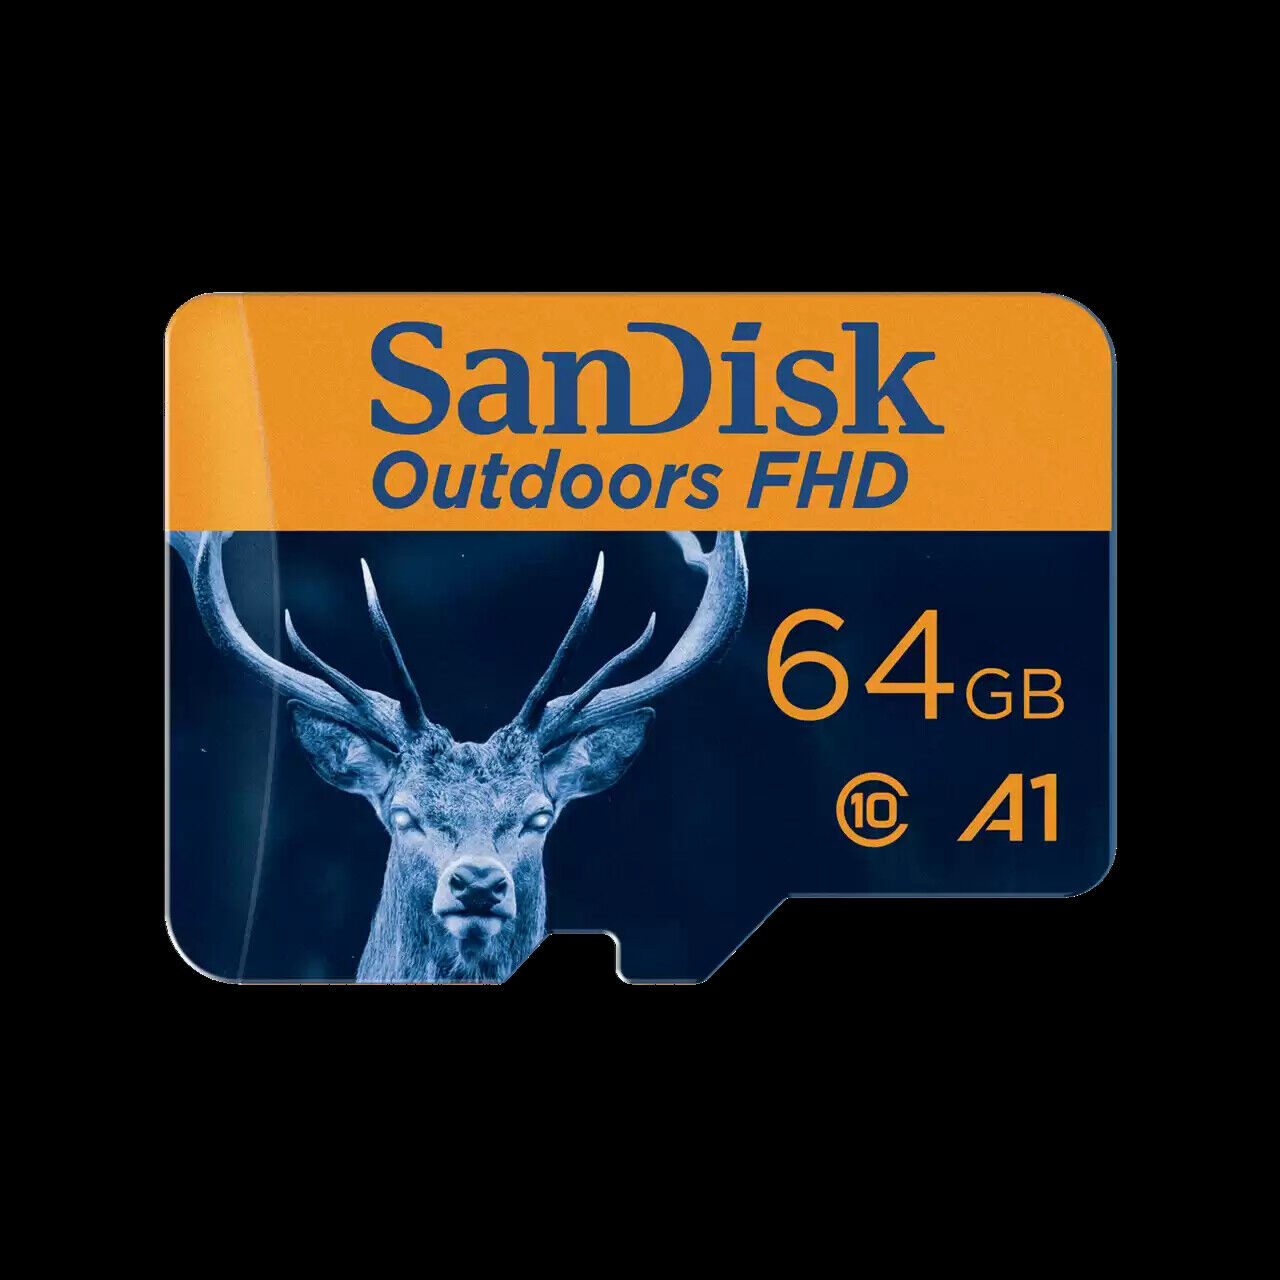 SanDisk 64GB microSDXC UHS-I Card with Adapter, Single Pack - SDSQUNR-064G-GN6VA